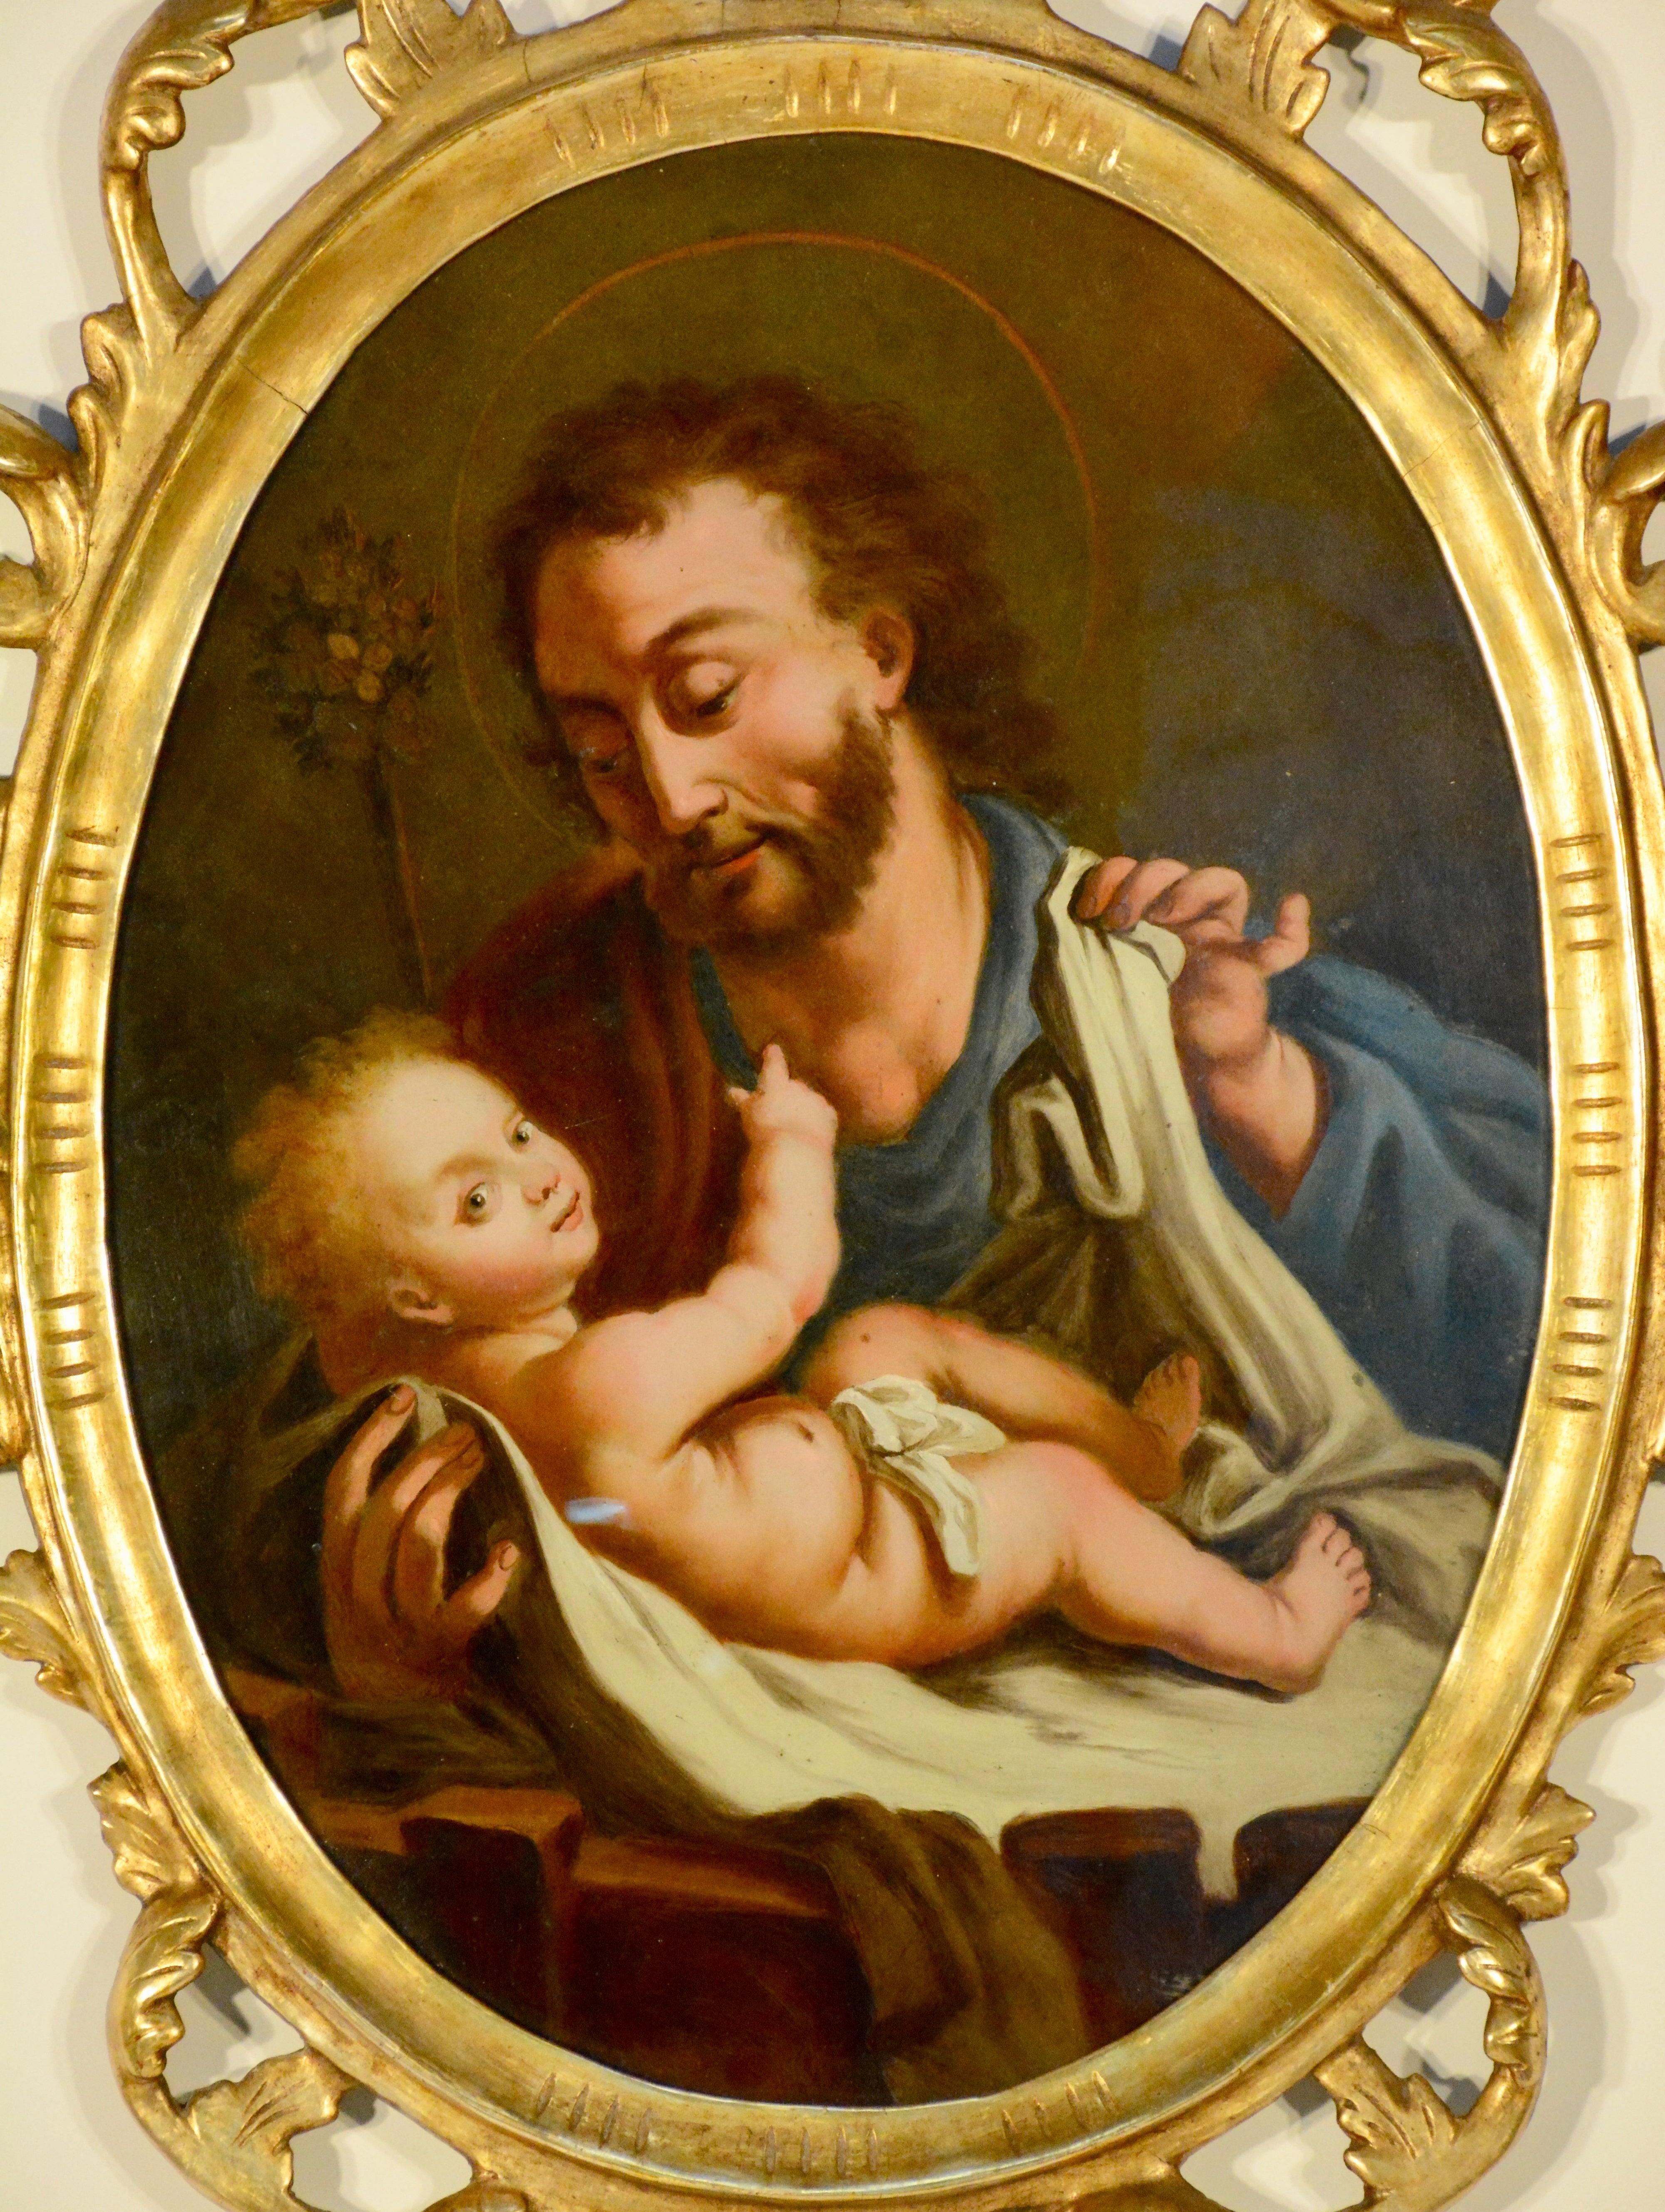 This painting is from Northern Spain of a religious reverse painting on glass depicting Saint Joseph with the Christ Child. It is enclosed by an arched, gilded wood and gesso frame and carved with open work detail. Painting measures 15.75